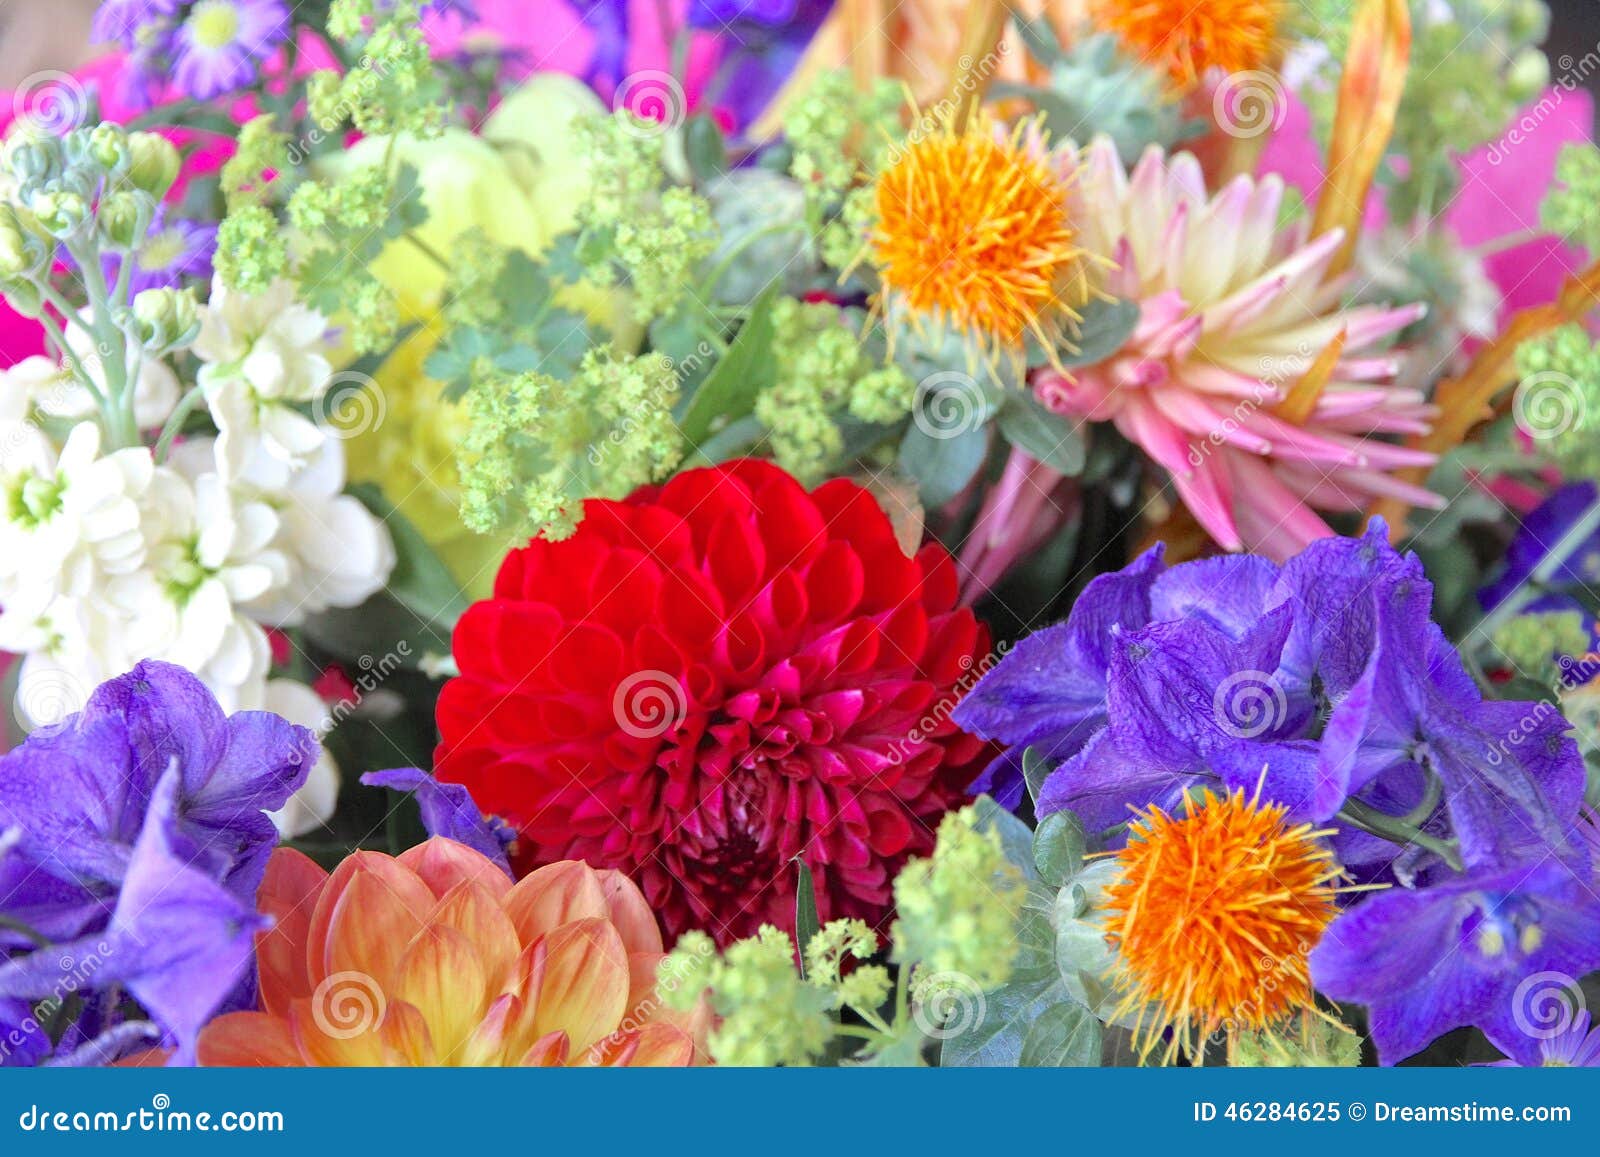 eclectic wedding flowers bouqet